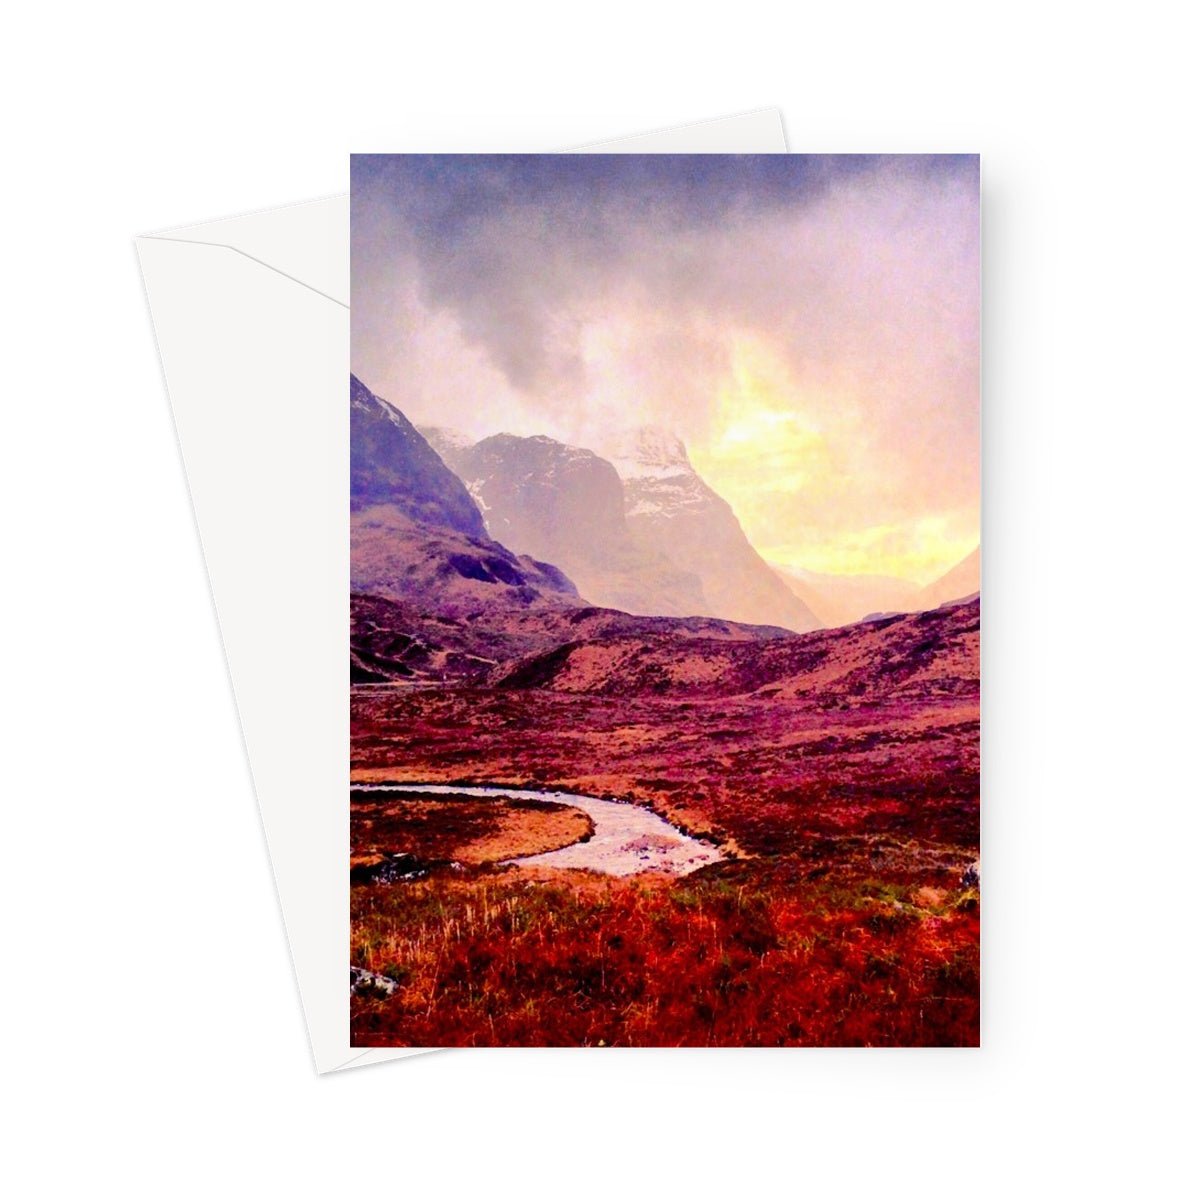 A Brooding Glencoe Art Gifts Greeting Card-Greetings Cards-Glencoe Art Gallery-5"x7"-10 Cards-Paintings, Prints, Homeware, Art Gifts From Scotland By Scottish Artist Kevin Hunter